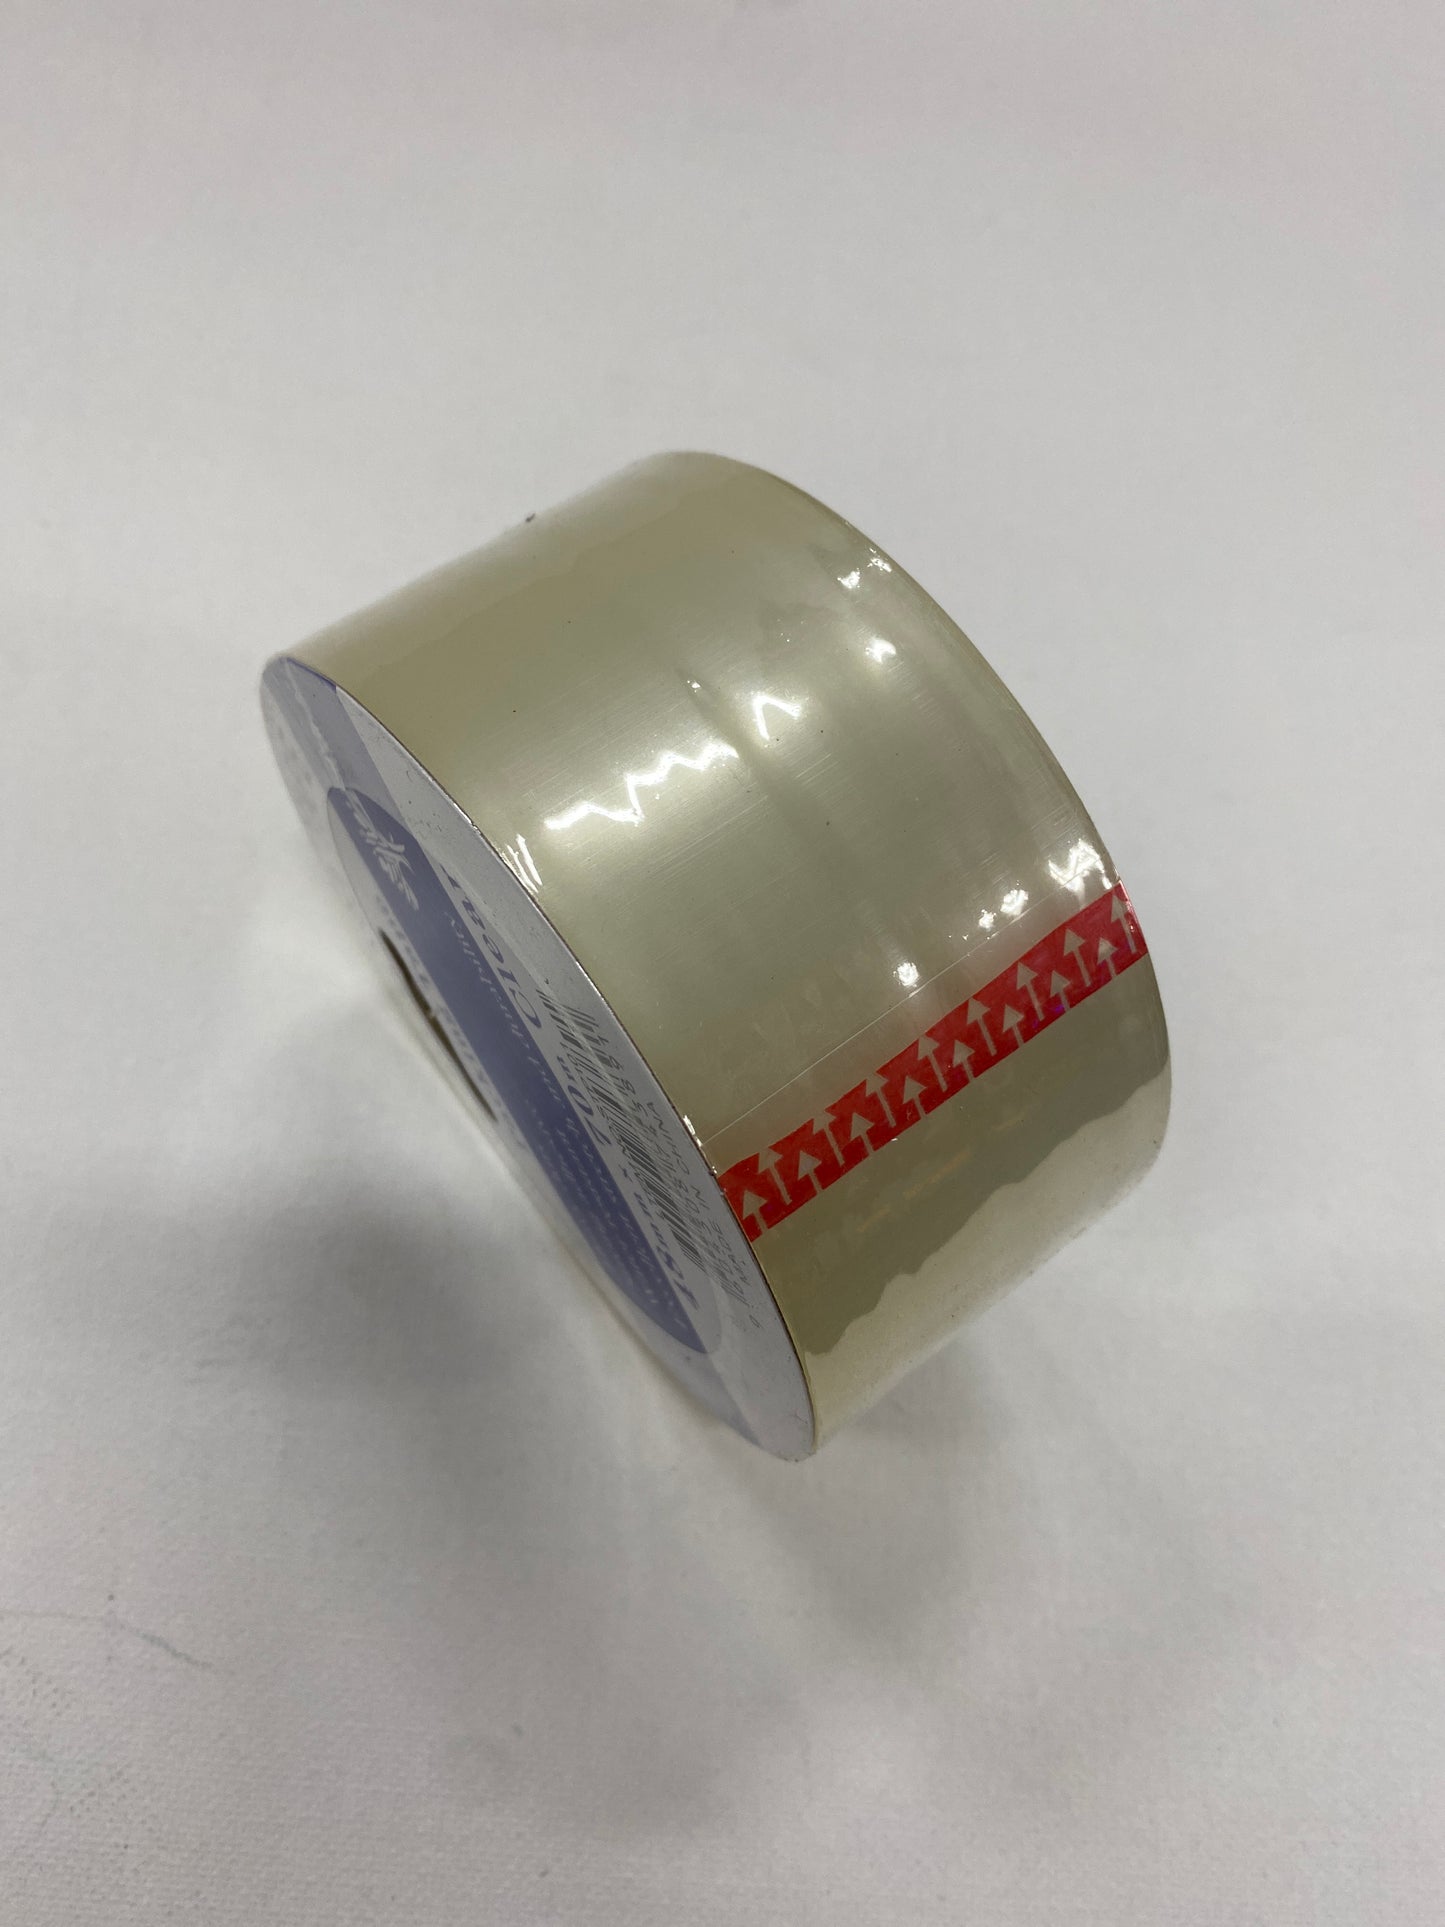 Clear packing Tape. Stp101c